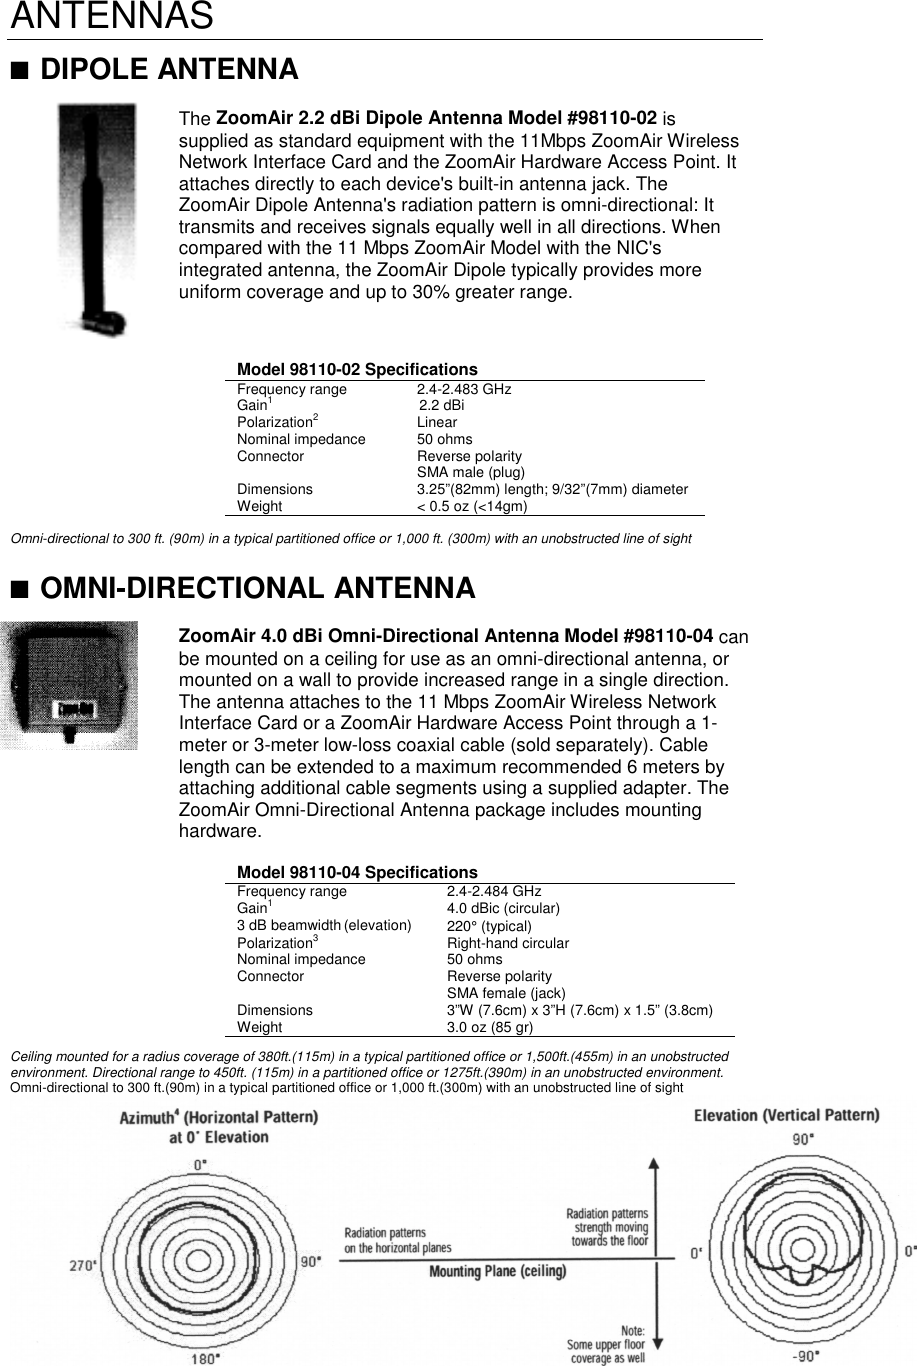 ANTENNAS■ DIPOLE ANTENNAThe ZoomAir 2.2 dBi Dipole Antenna Model #98110-02 issupplied as standard equipment with the 11Mbps ZoomAir WirelessNetwork Interface Card and the ZoomAir Hardware Access Point. Itattaches directly to each device&apos;s built-in antenna jack. TheZoomAir Dipole Antenna&apos;s radiation pattern is omni-directional: Ittransmits and receives signals equally well in all directions. Whencompared with the 11 Mbps ZoomAir Model with the NIC&apos;sintegrated antenna, the ZoomAir Dipole typically provides moreuniform coverage and up to 30% greater range.Model 98110-02 SpecificationsFrequency range 2.4-2.483 GHzGain1 2.2 dBiPolarization2LinearNominal impedance 50 ohmsConnector Reverse polaritySMA male (plug)Dimensions 3.25”(82mm) length; 9/32”(7mm) diameterWeight &lt; 0.5 oz (&lt;14gm)Omni-directional to 300 ft. (90m) in a typical partitioned office or 1,000 ft. (300m) with an unobstructed line of sight■ OMNI-DIRECTIONAL ANTENNAZoomAir 4.0 dBi Omni-Directional Antenna Model #98110-04 canbe mounted on a ceiling for use as an omni-directional antenna, ormounted on a wall to provide increased range in a single direction.The antenna attaches to the 11 Mbps ZoomAir Wireless NetworkInterface Card or a ZoomAir Hardware Access Point through a 1-meter or 3-meter low-loss coaxial cable (sold separately). Cablelength can be extended to a maximum recommended 6 meters byattaching additional cable segments using a supplied adapter. TheZoomAir Omni-Directional Antenna package includes mountinghardware.Model 98110-04 SpecificationsFrequency range 2.4-2.484 GHzGain14.0 dBic (circular)3 dB beamwidth (elevation) 220° (typical)Polarization3Right-hand circularNominal impedance 50 ohmsConnector Reverse polaritySMA female (jack)Dimensions 3”W (7.6cm) x 3”H (7.6cm) x 1.5” (3.8cm)Weight 3.0 oz (85 gr)Ceiling mounted for a radius coverage of 380ft.(115m) in a typical partitioned office or 1,500ft.(455m) in an unobstructedenvironment. Directional range to 450ft. (115m) in a partitioned office or 1275ft.(390m) in an unobstructed environment.Omni-directional to 300 ft.(90m) in a typical partitioned office or 1,000 ft.(300m) with an unobstructed line of sight